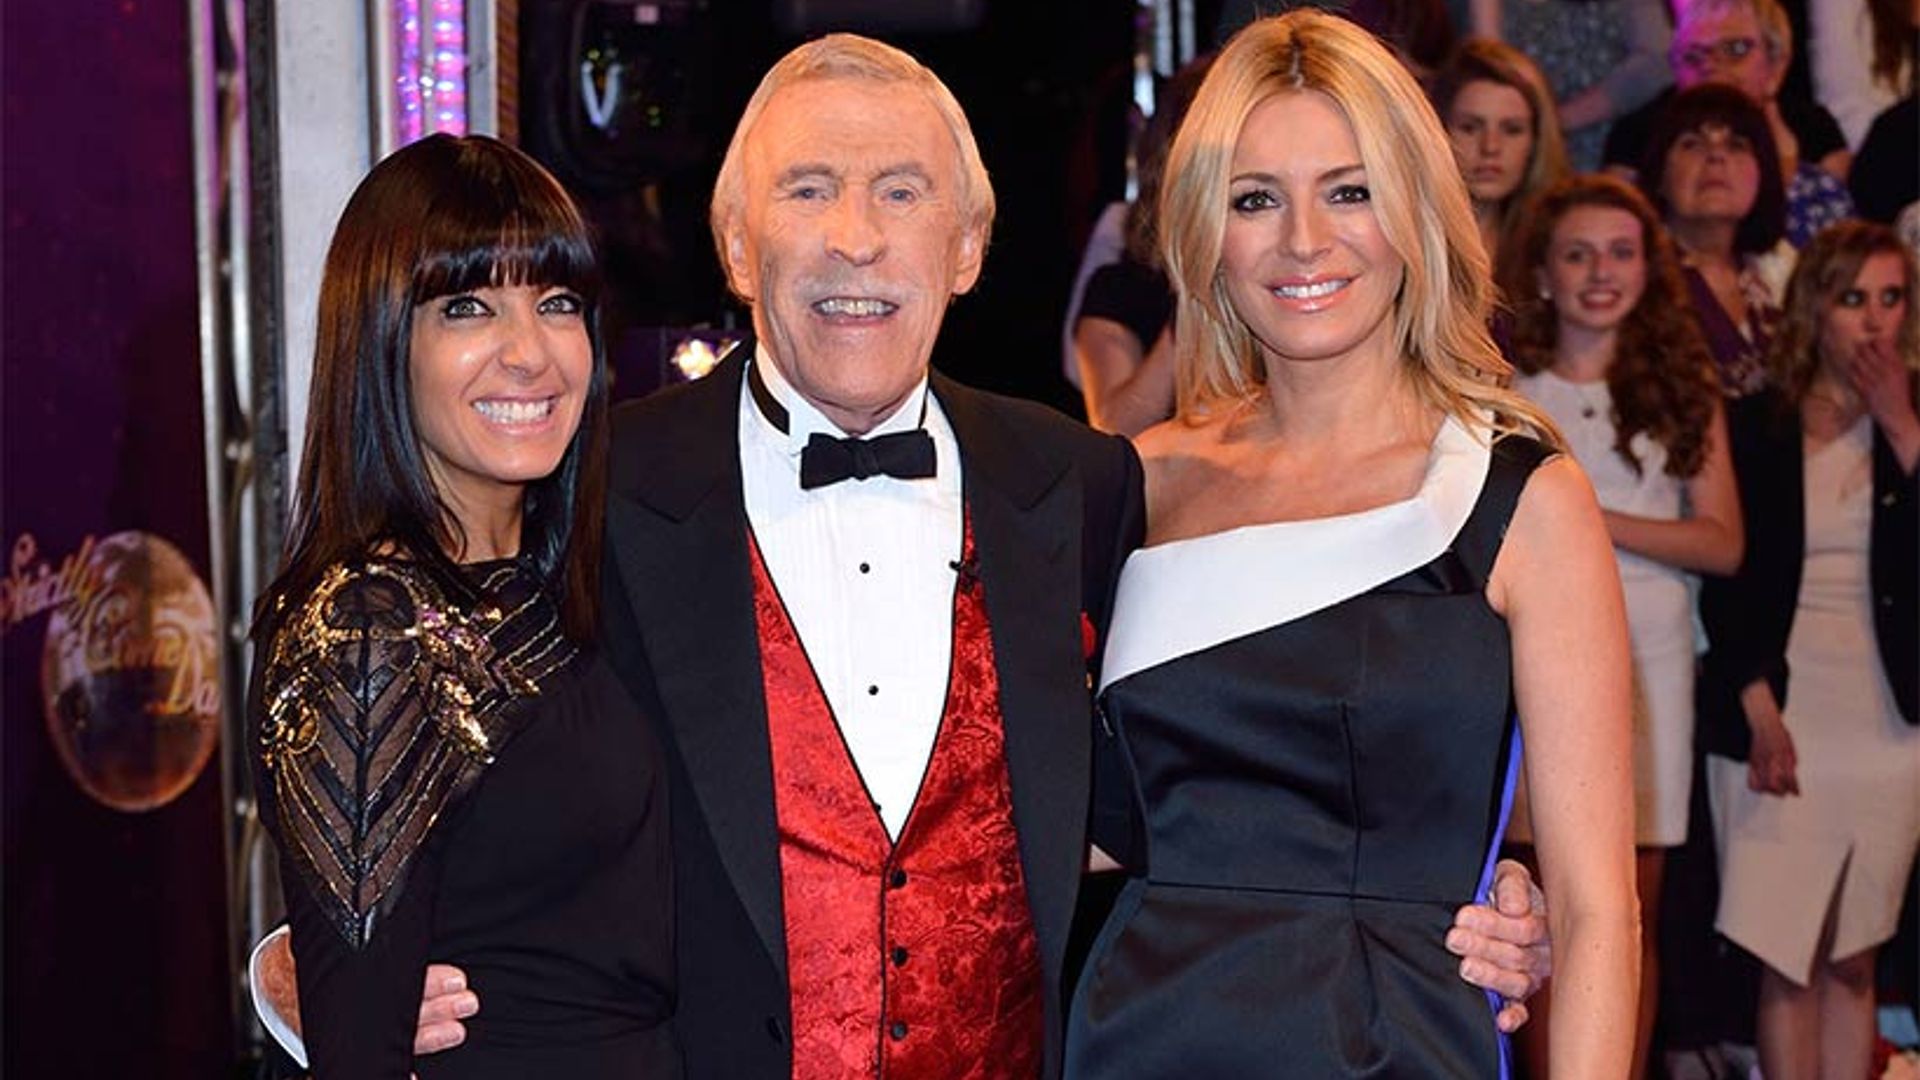 Bruce-Forsyth-Claudia-Winkleman and Tess Daley in 2014